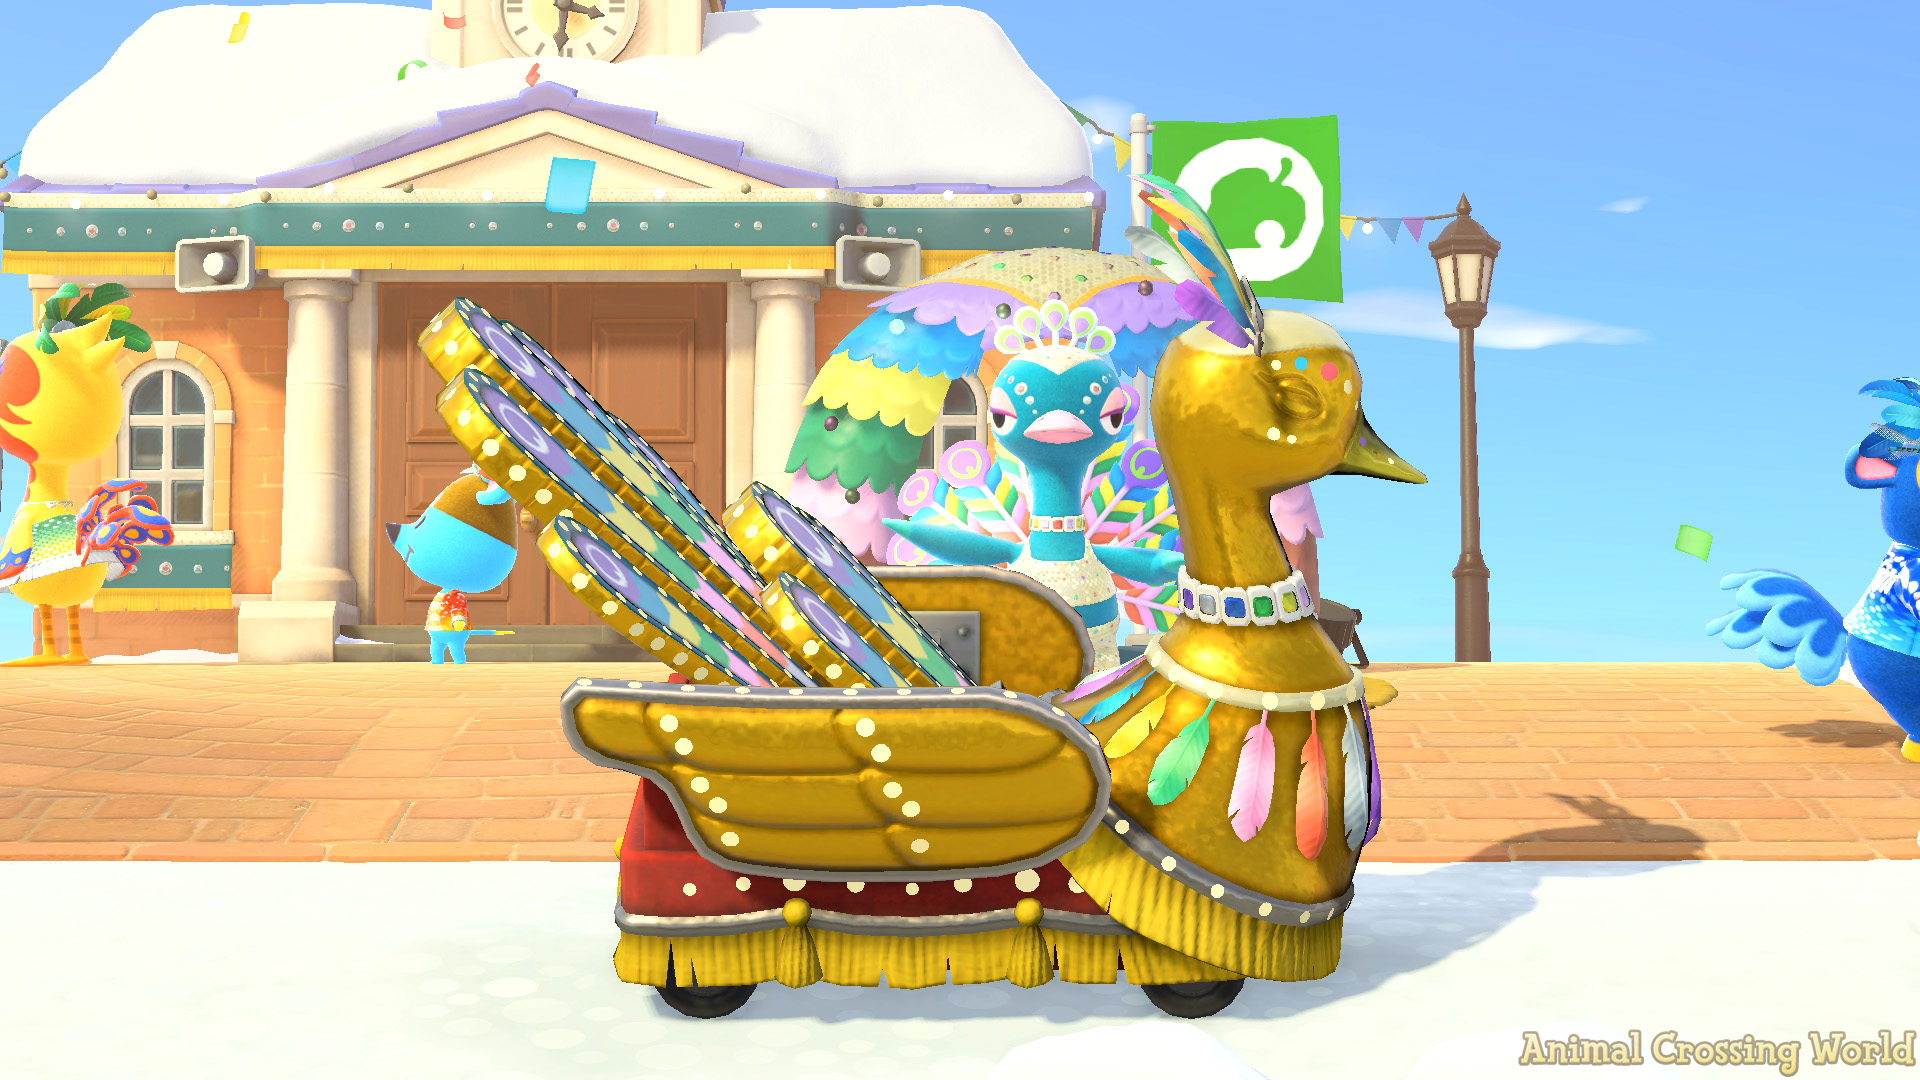 Festivale Event 2023 Guide: Feathers, Rewards, Activities in Animal Crossing:  New Horizons - Animal Crossing World